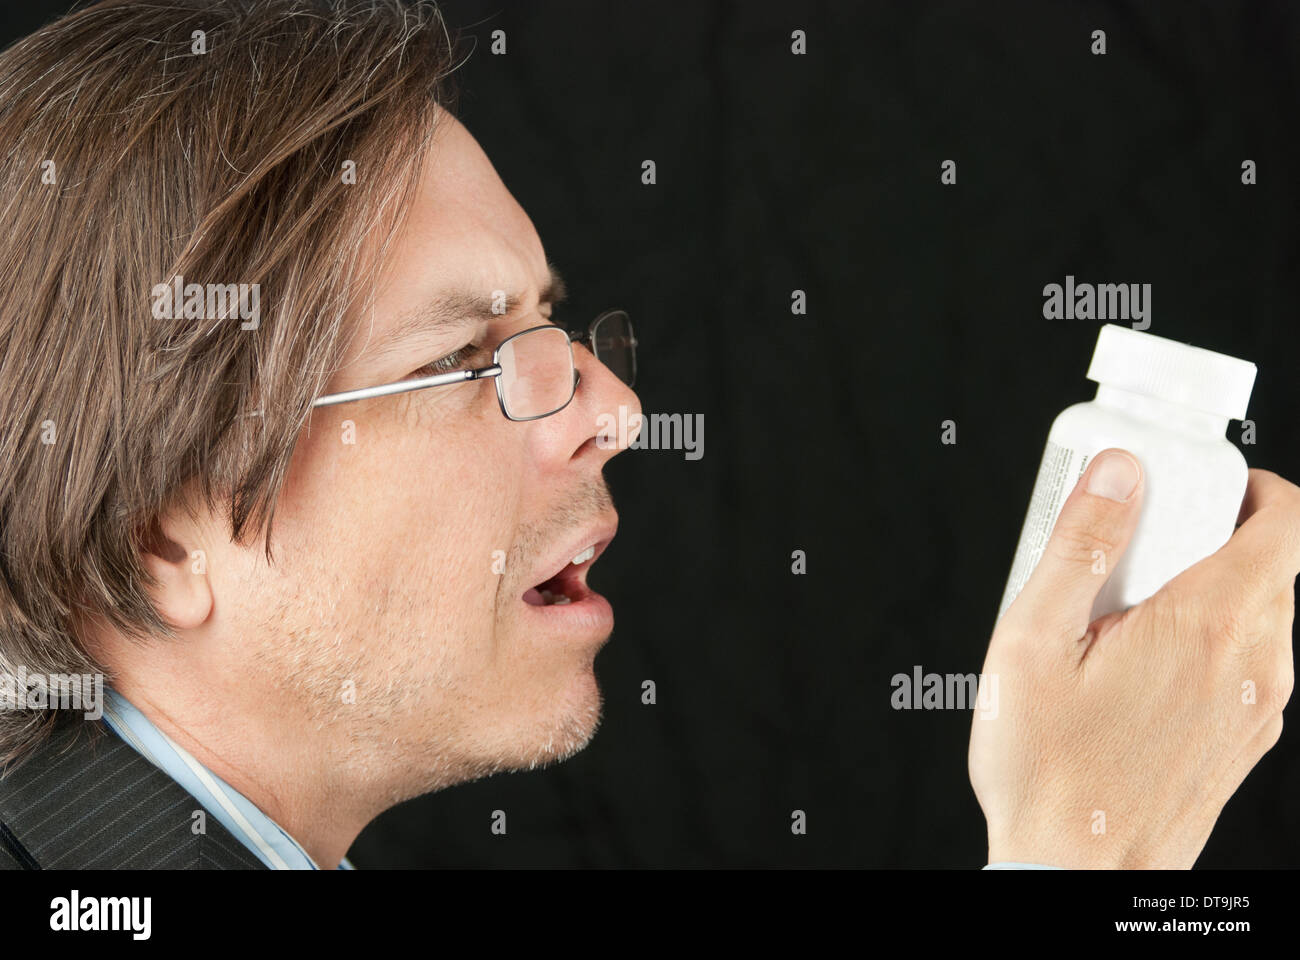 Close-up of a casual businessman wearing glasses trying to read a pill bottle label. Stock Photo